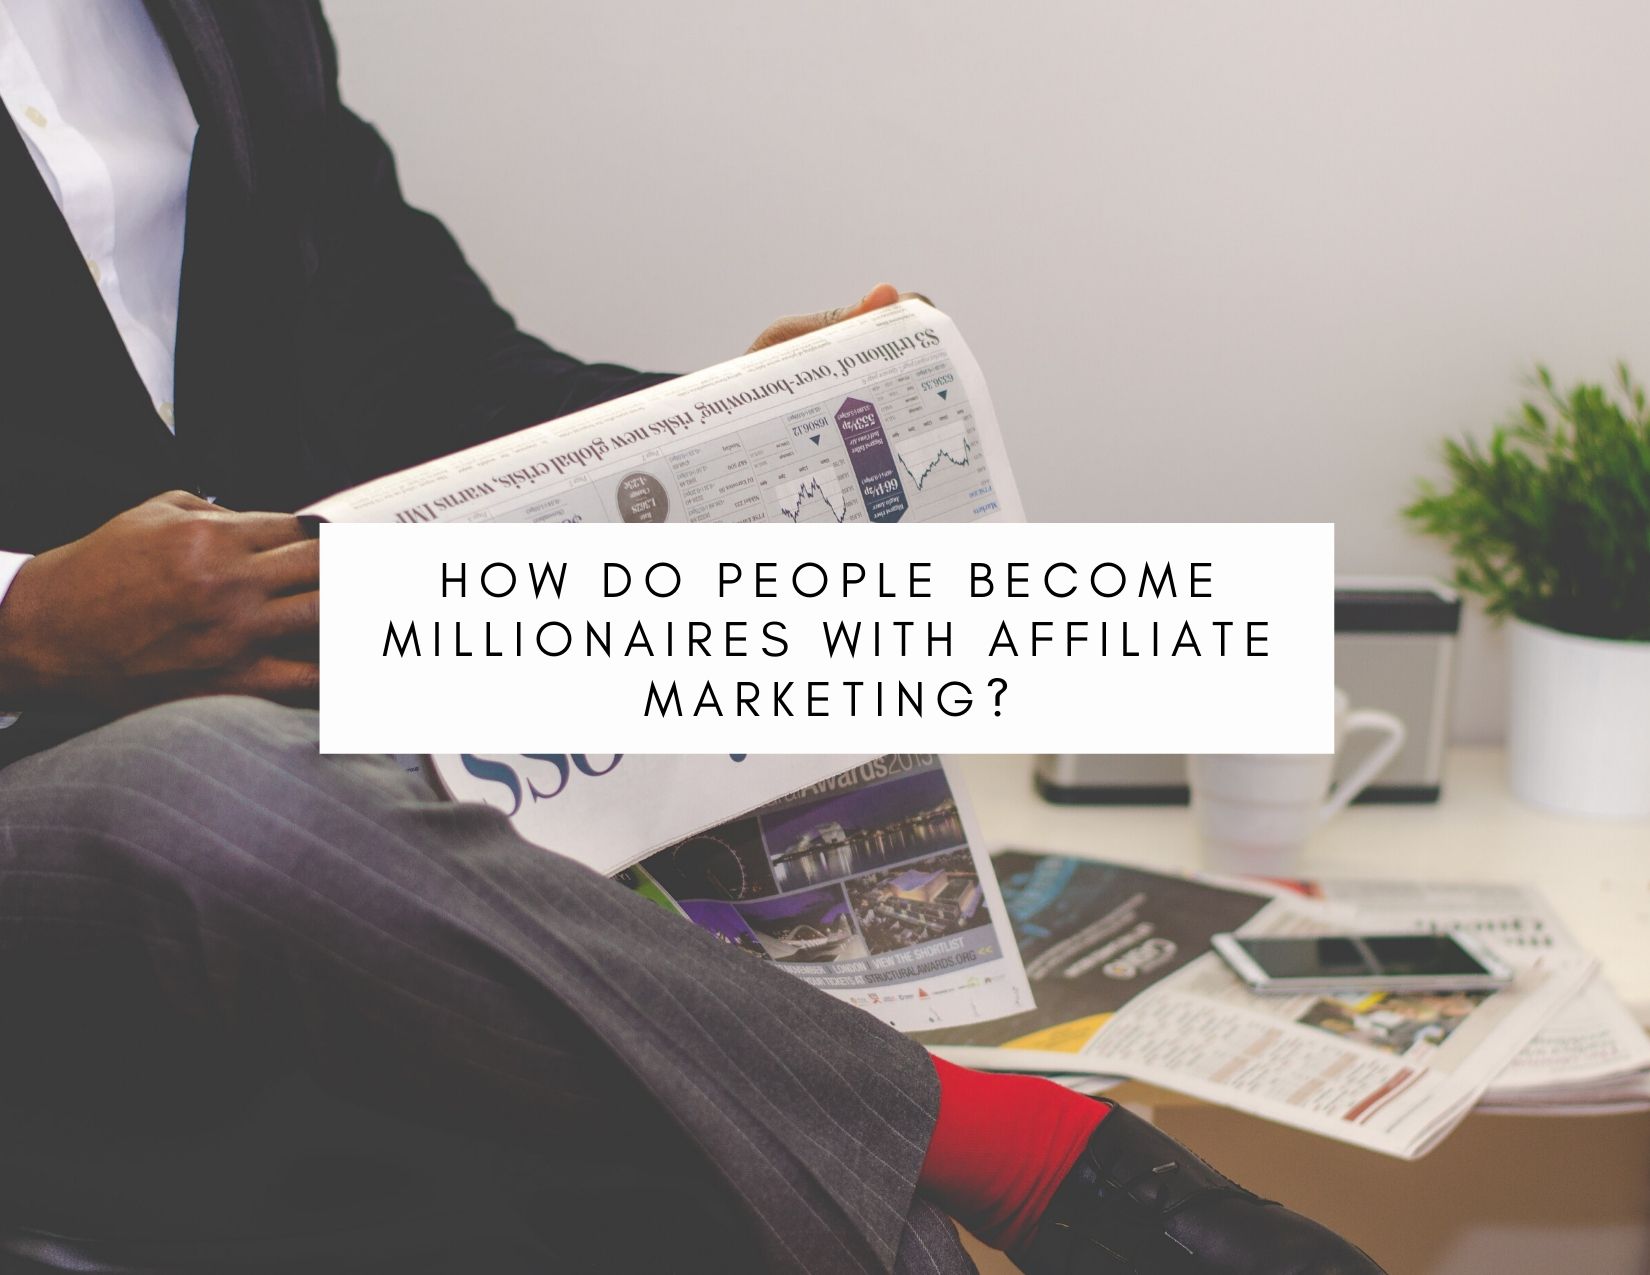 How Do People Become Millionaires With Affiliate Marketing?